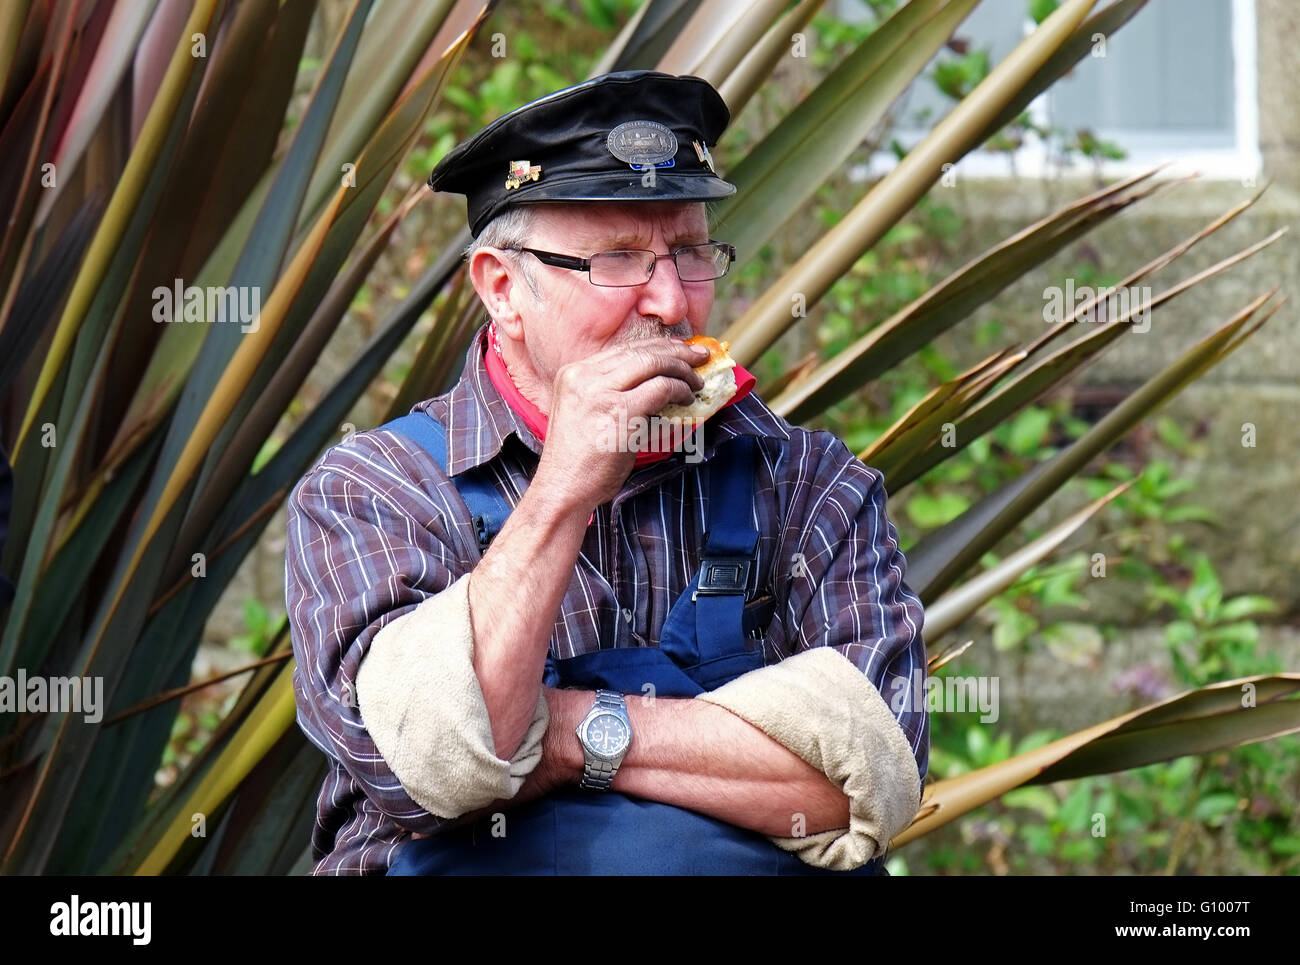 A steam engine enthusiast taking a break Stock Photo